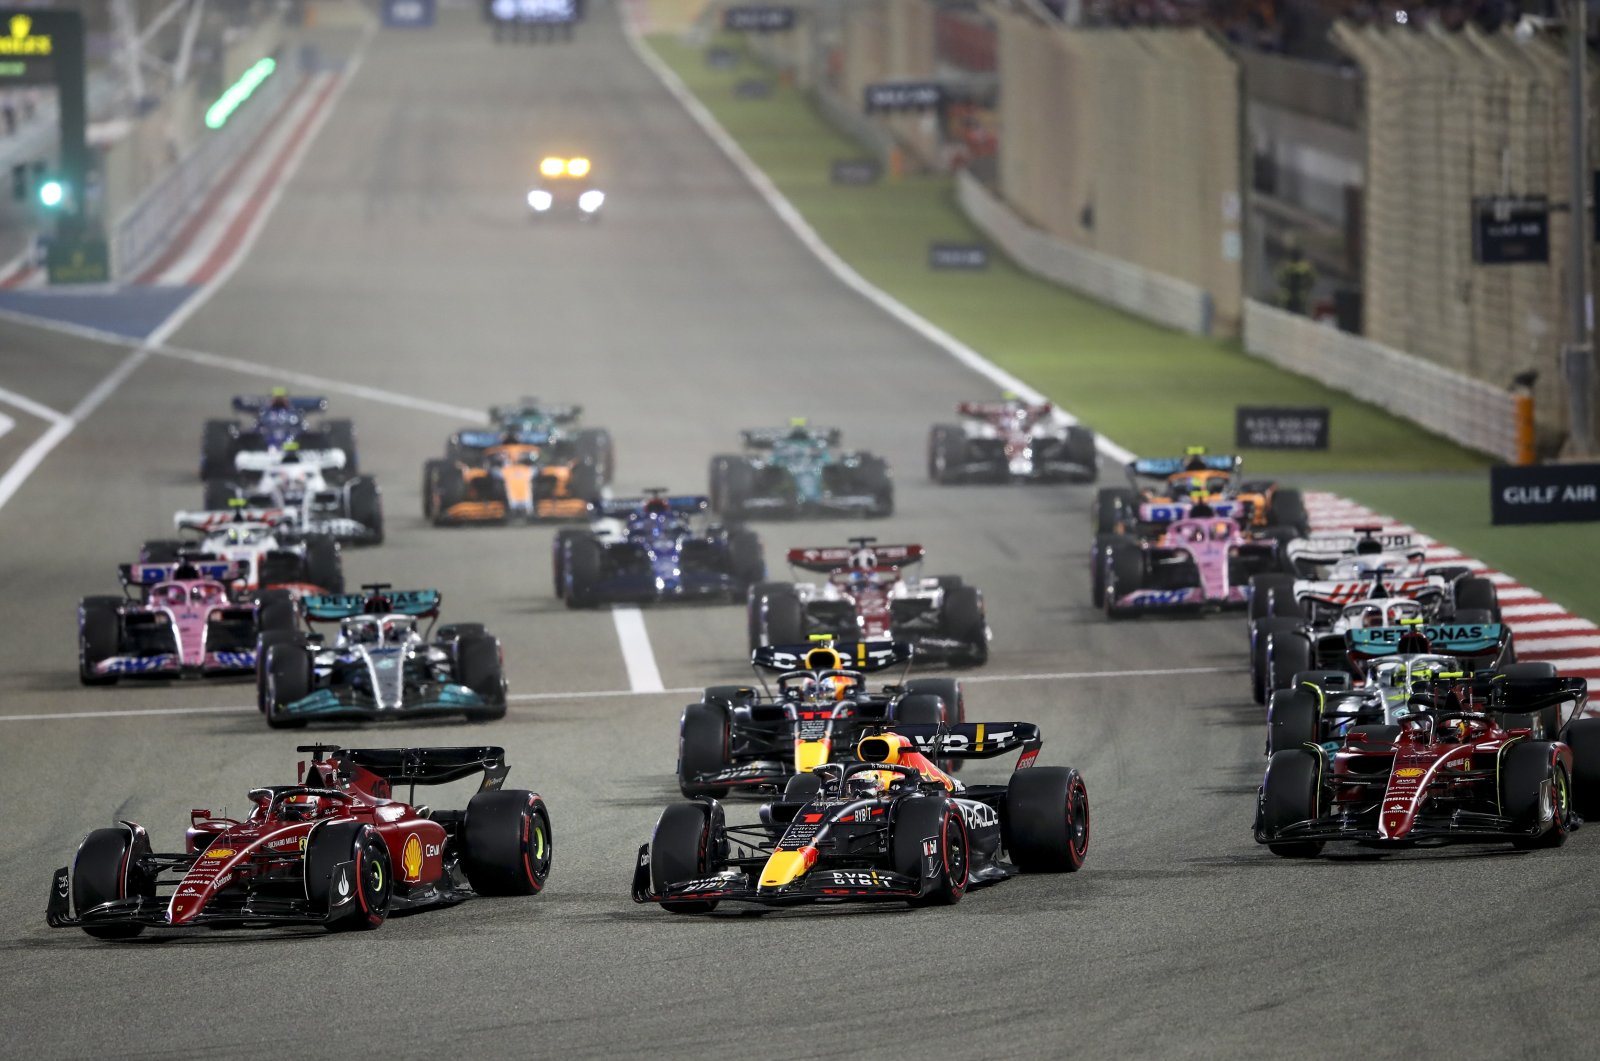 Monaco&#039;s Formula One driver Charles Leclerc (Front L) of Scuderia Ferrari leads the pack at the start of the Formula One Grand Prix of Bahrain at the Bahrain International Circuit in Sakhir, Bahrain, March 20, 2022. (EPA Photo)